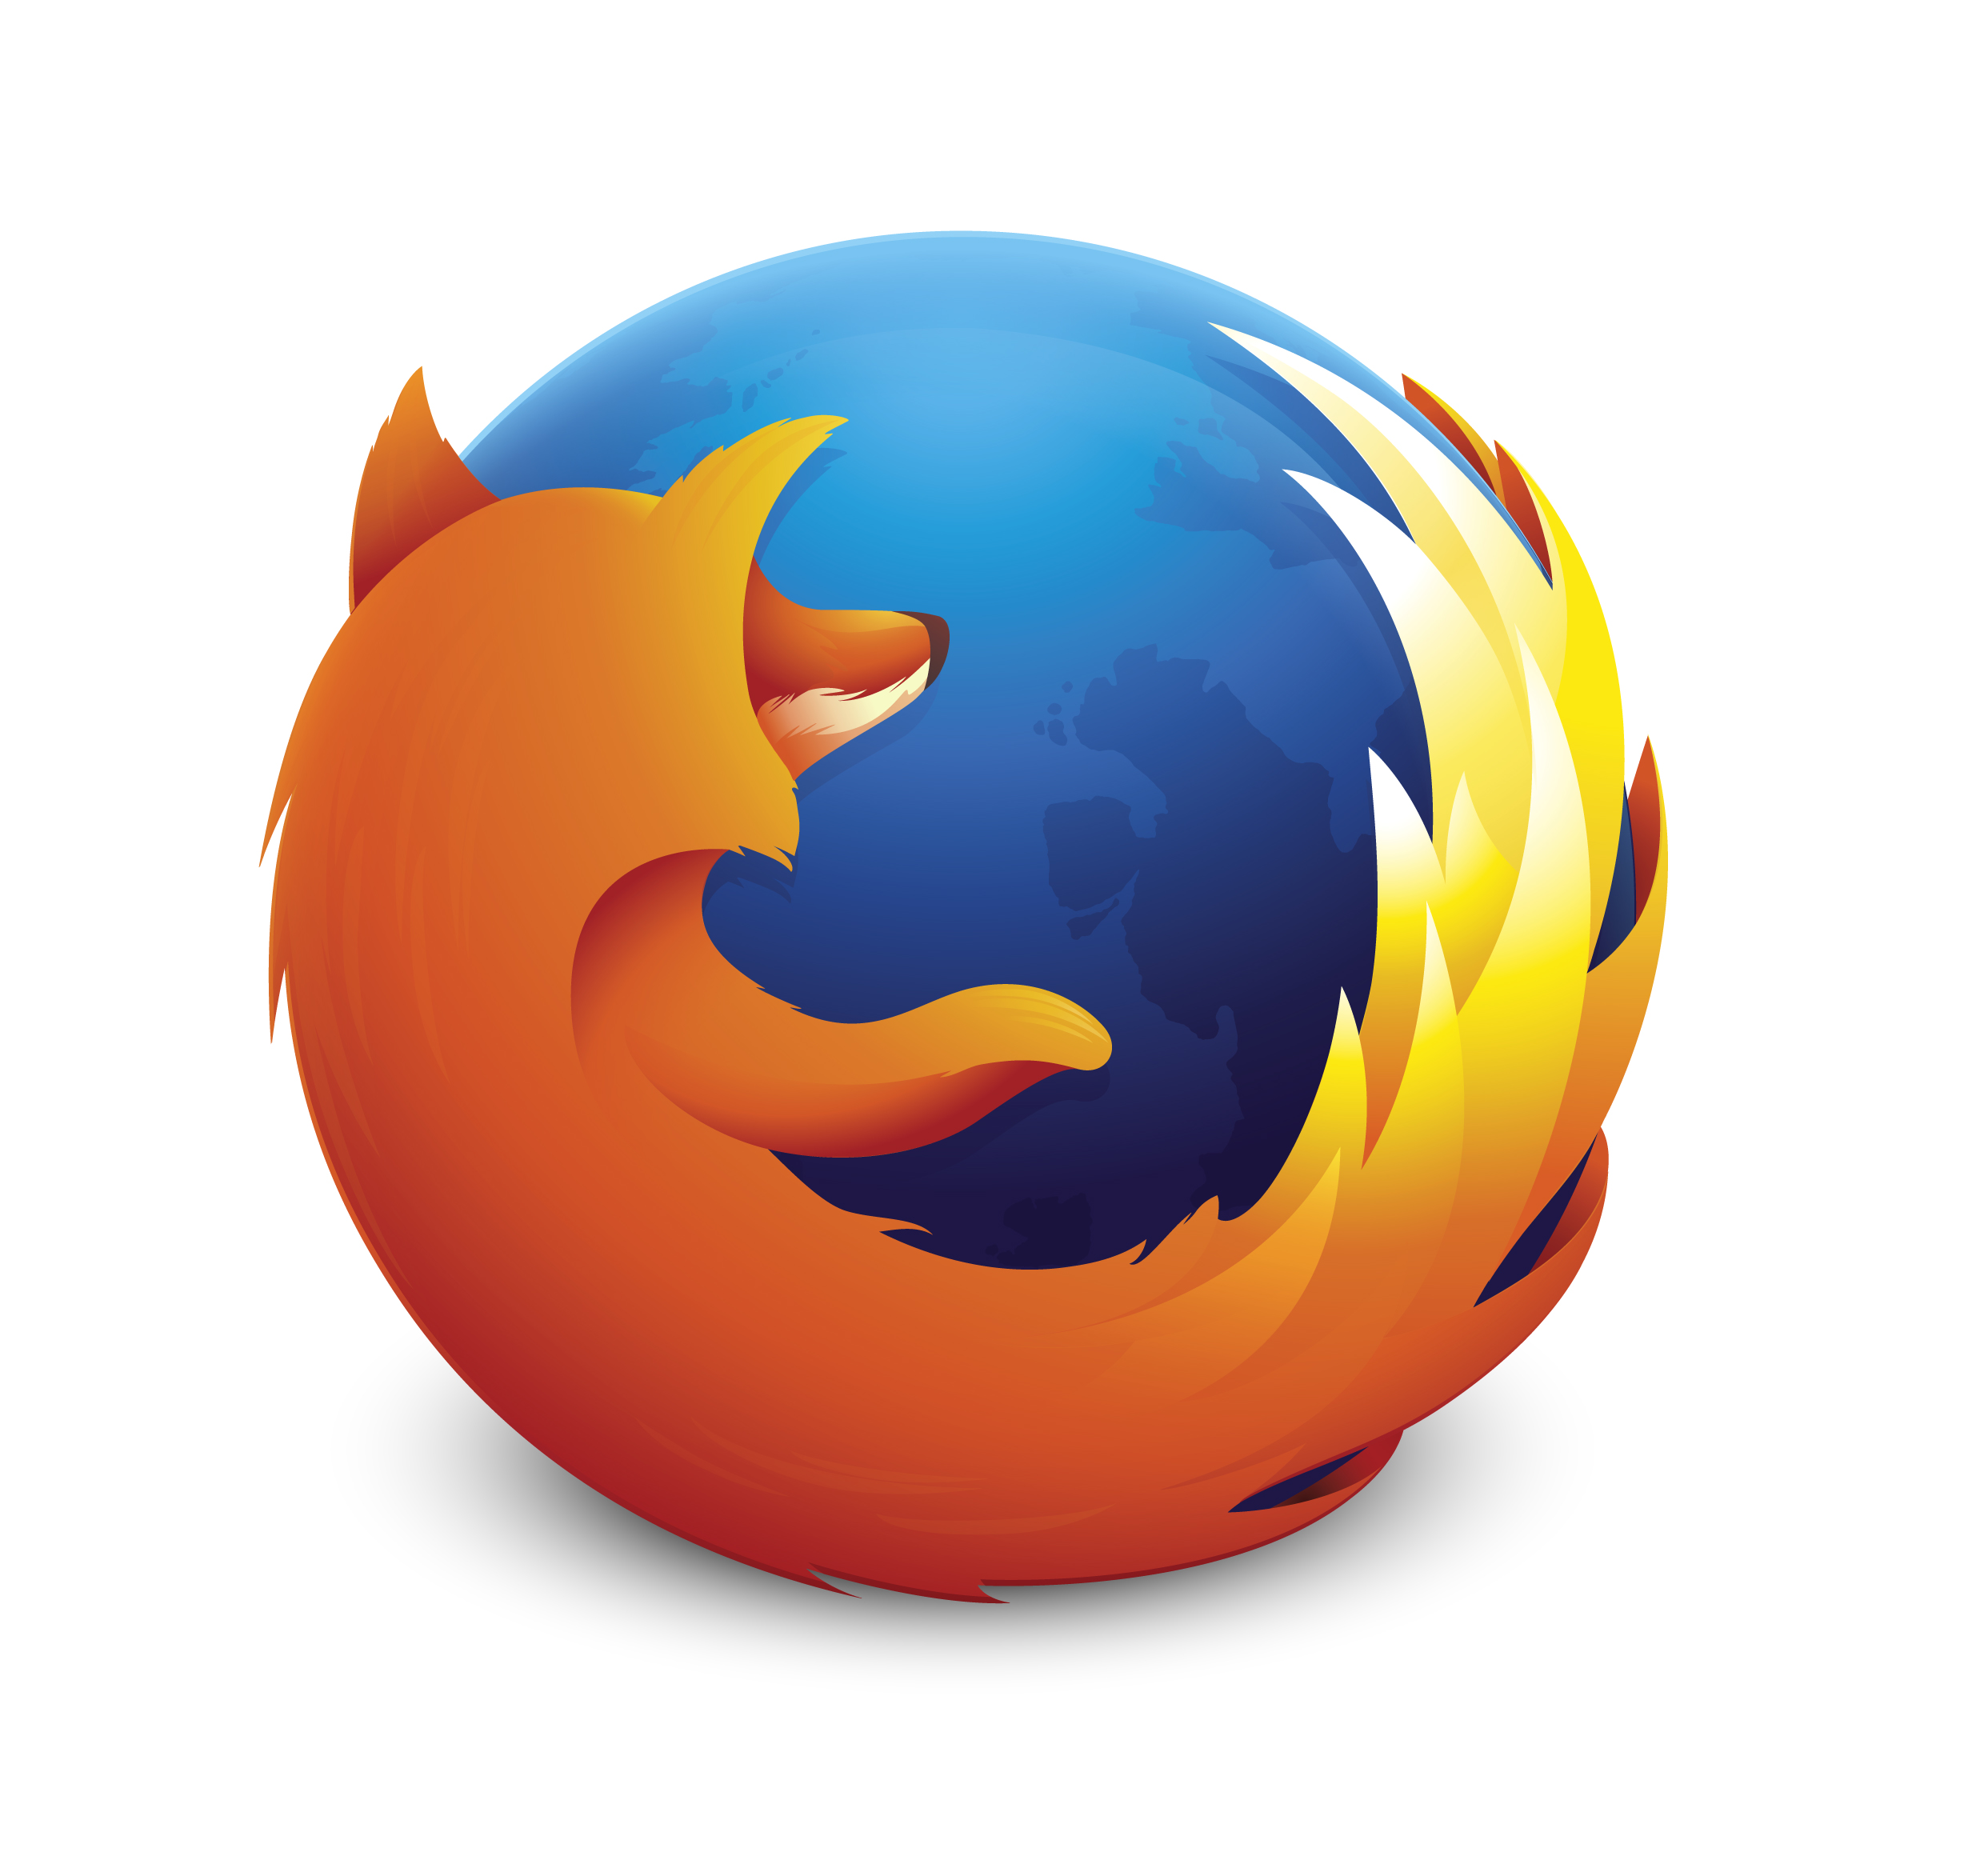 Mozilla Introduces the Most Customizable Firefox Ever with an Elegant New Design